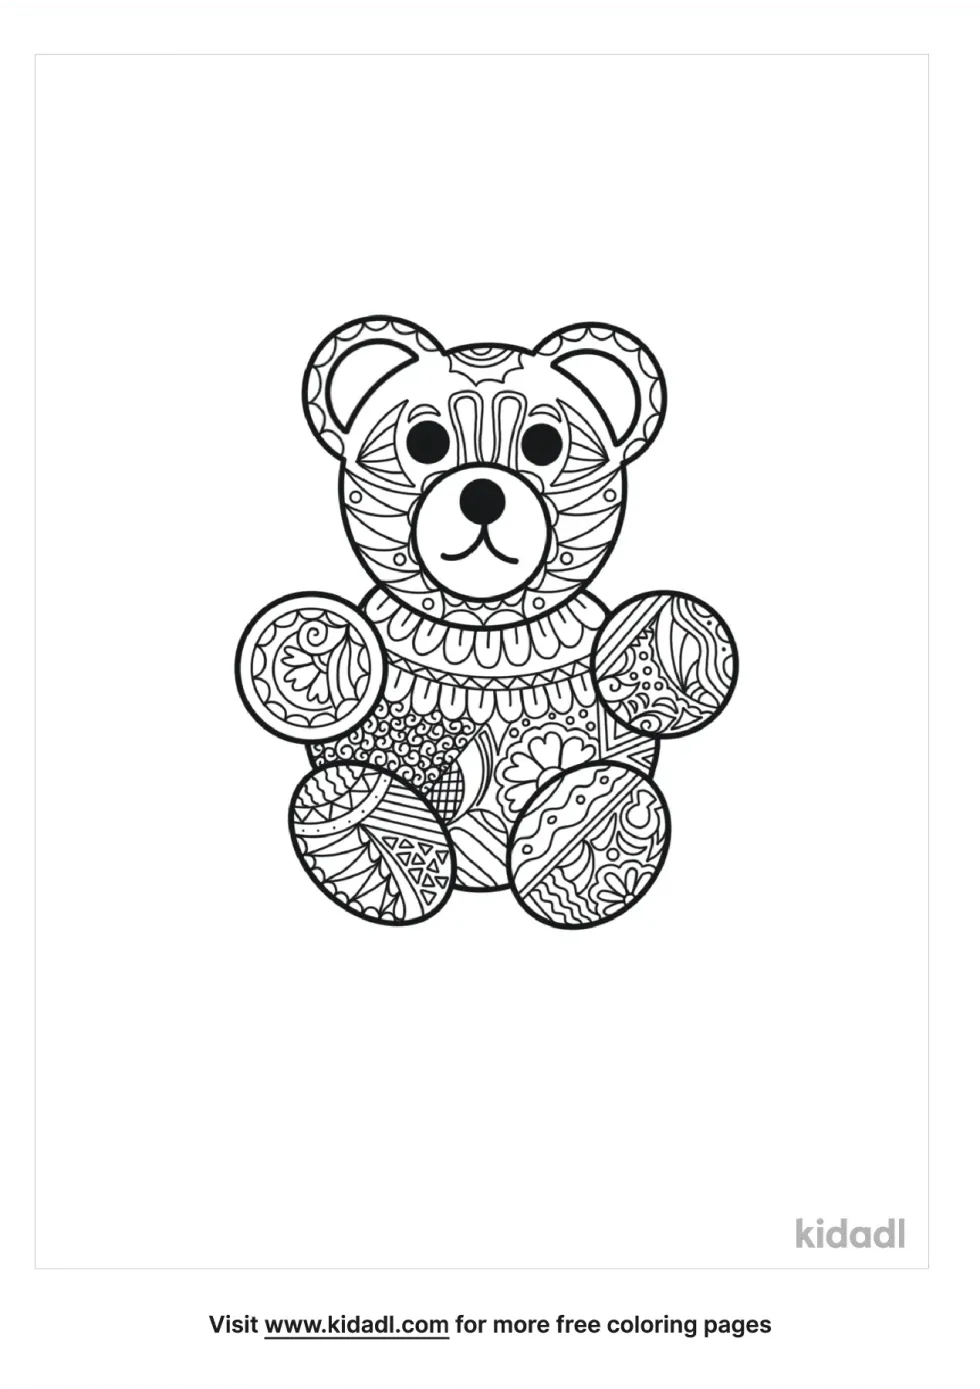 Teddy Bear Doodle Coloring Page